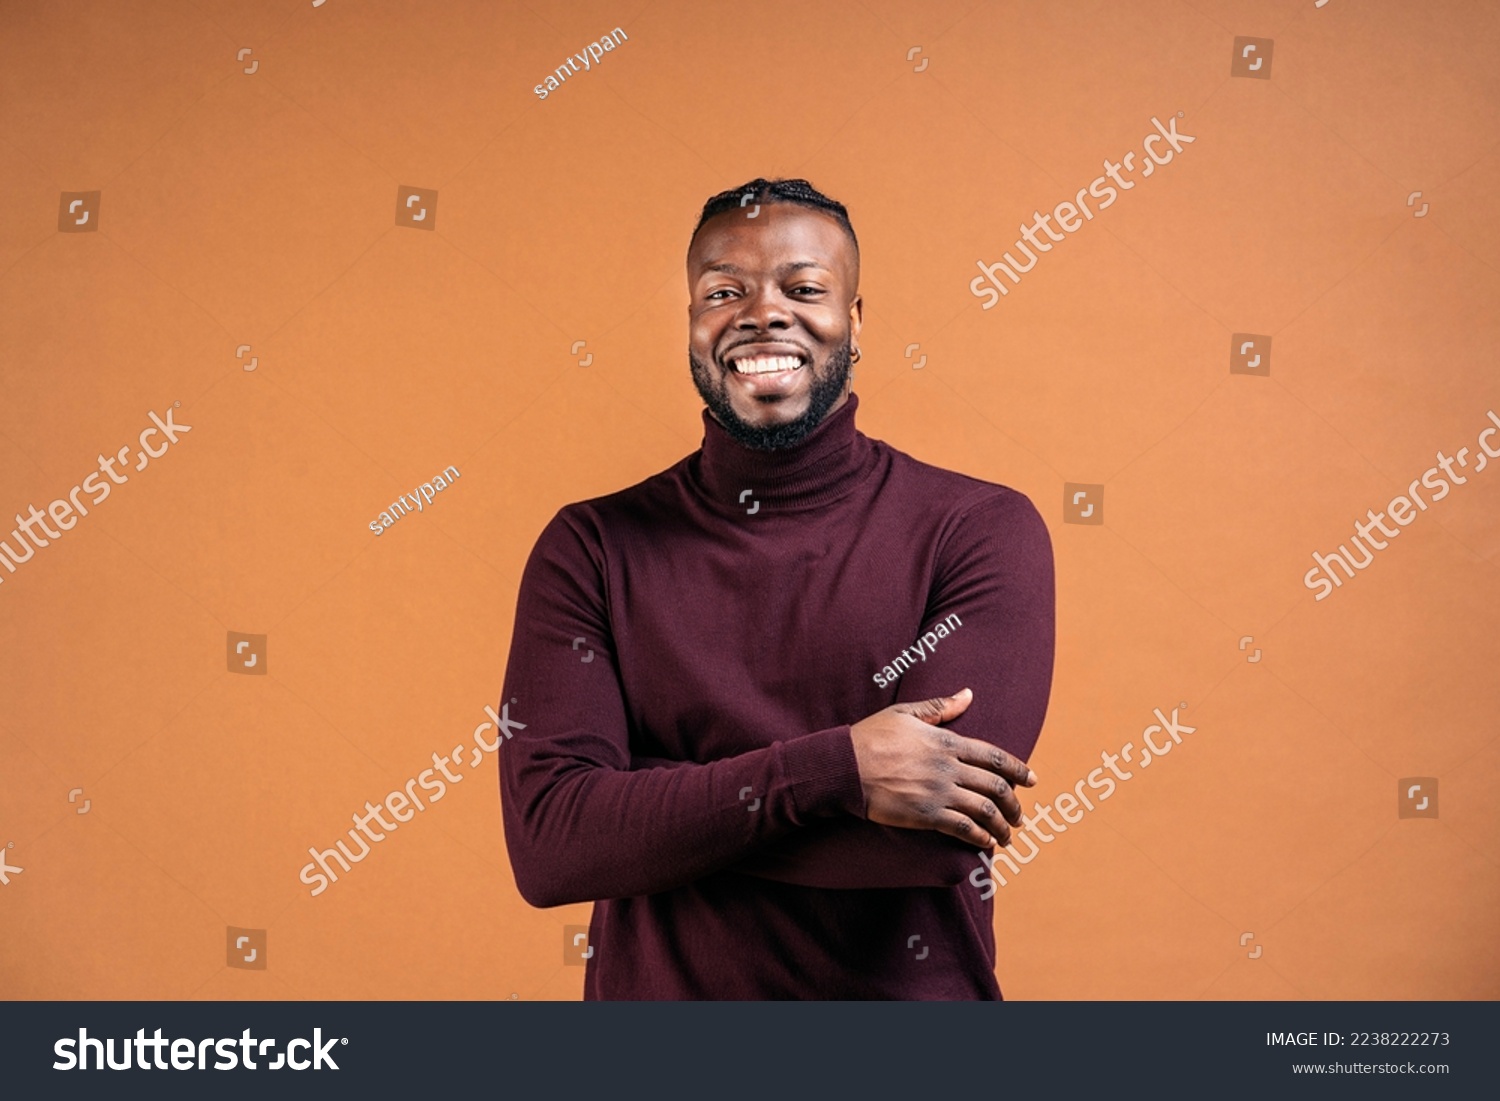 Cheerful black man wearing black leather jacket smiling in studio shot and looking at camera against brown background. #2238222273